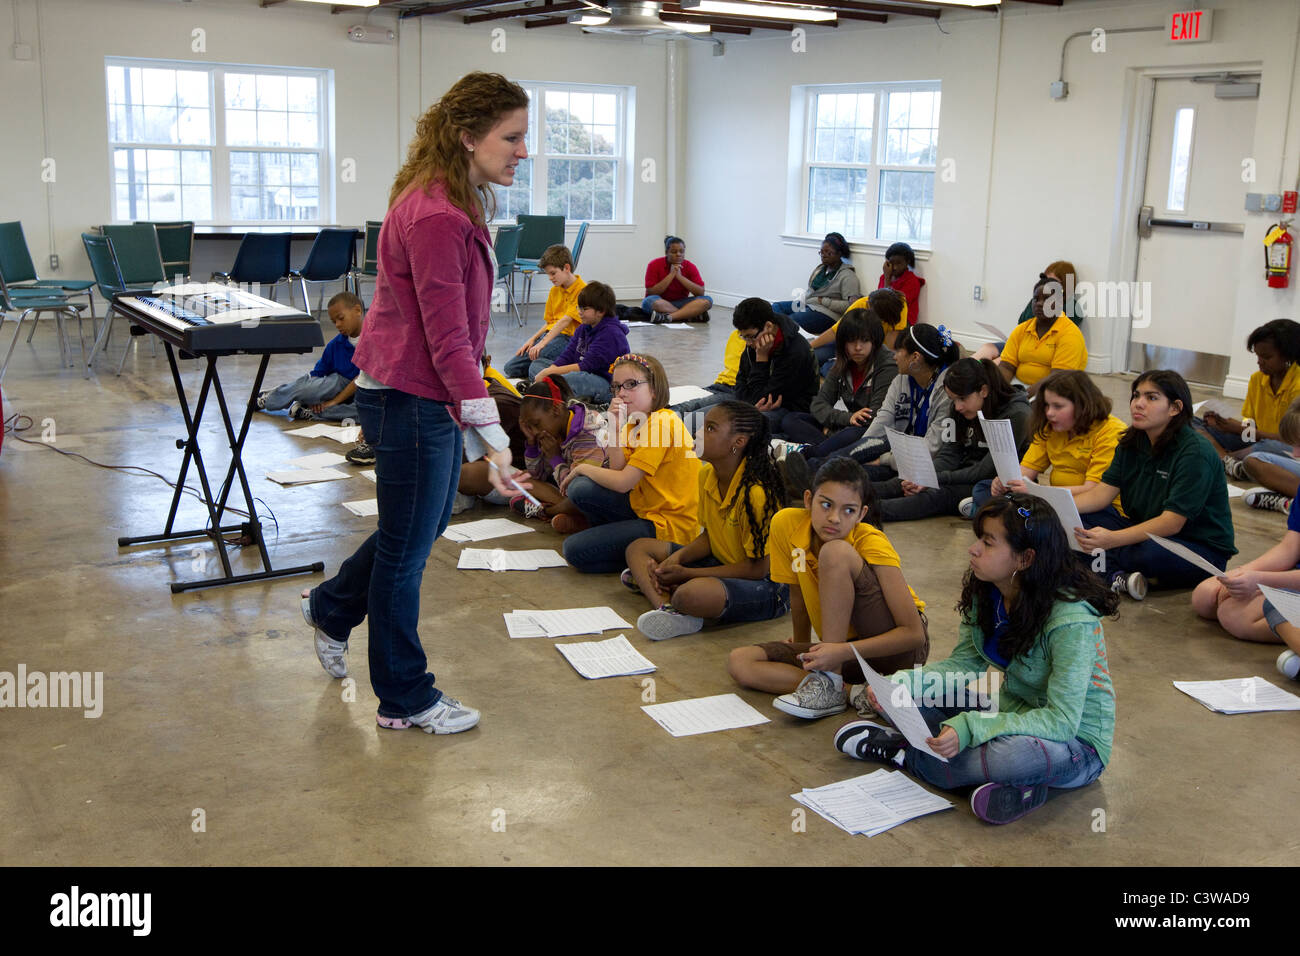 Middle school students look at sheet music before rehearsing song during music class taught by Anglo female teacher. Stock Photo